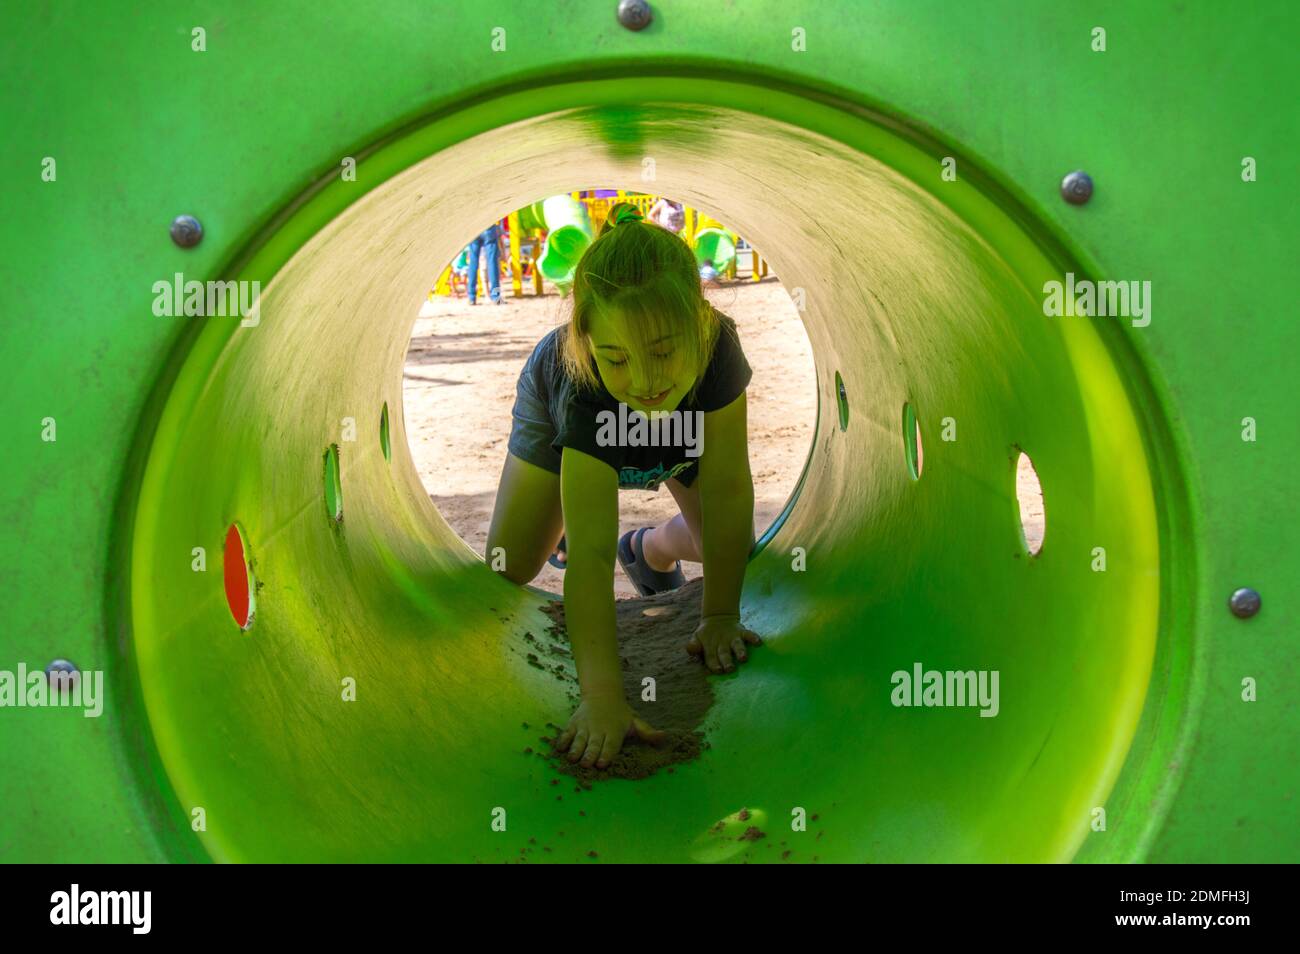 Girl Playing In Green Tube At Playground Stock Photo